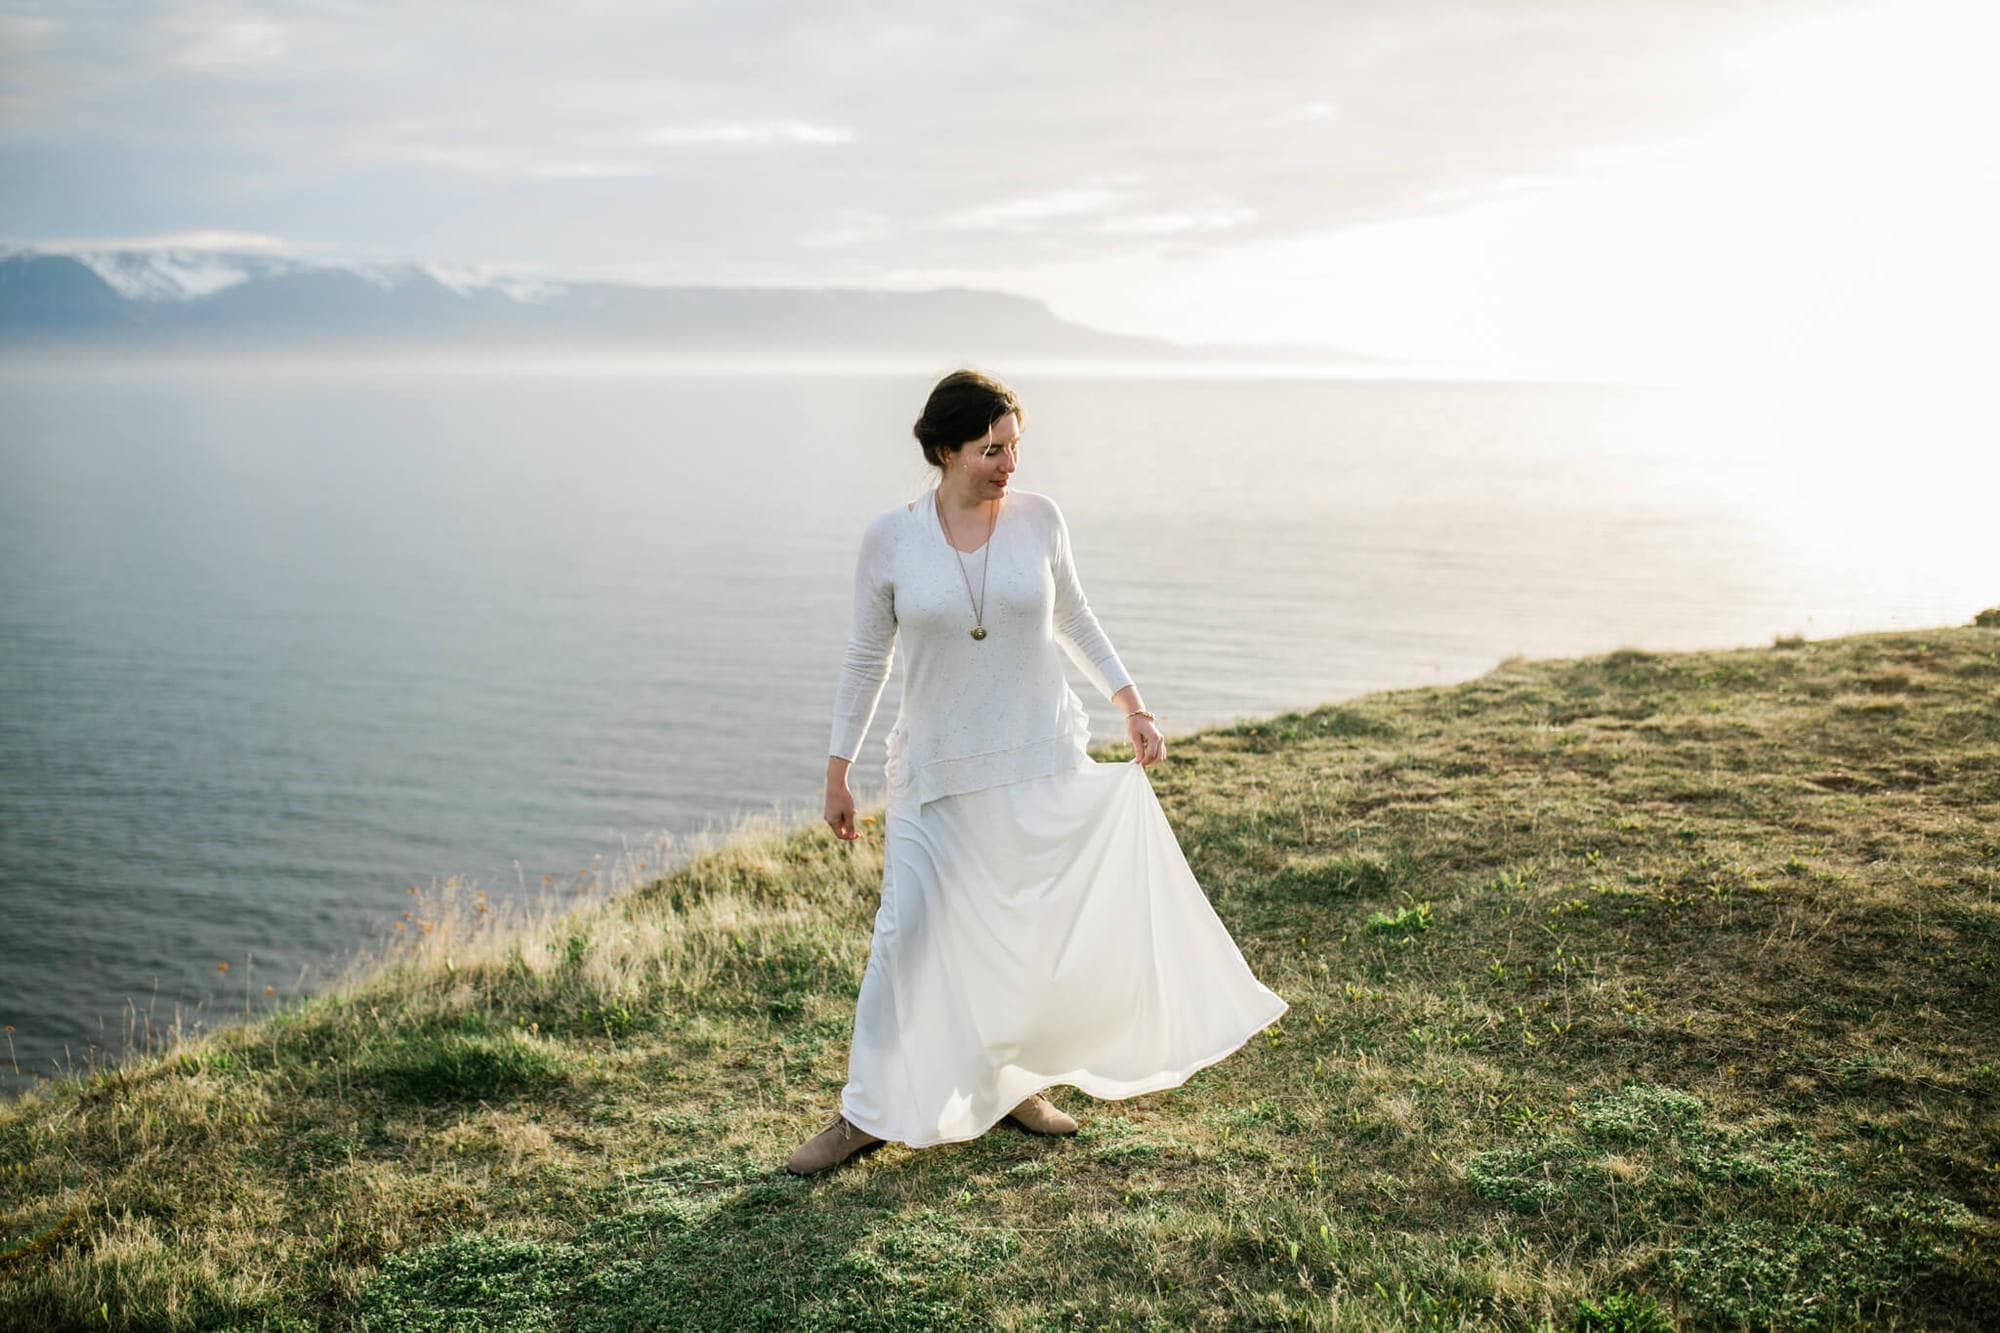 A bride stands on a cliff overlooking the ocean at sunset in Iceland.